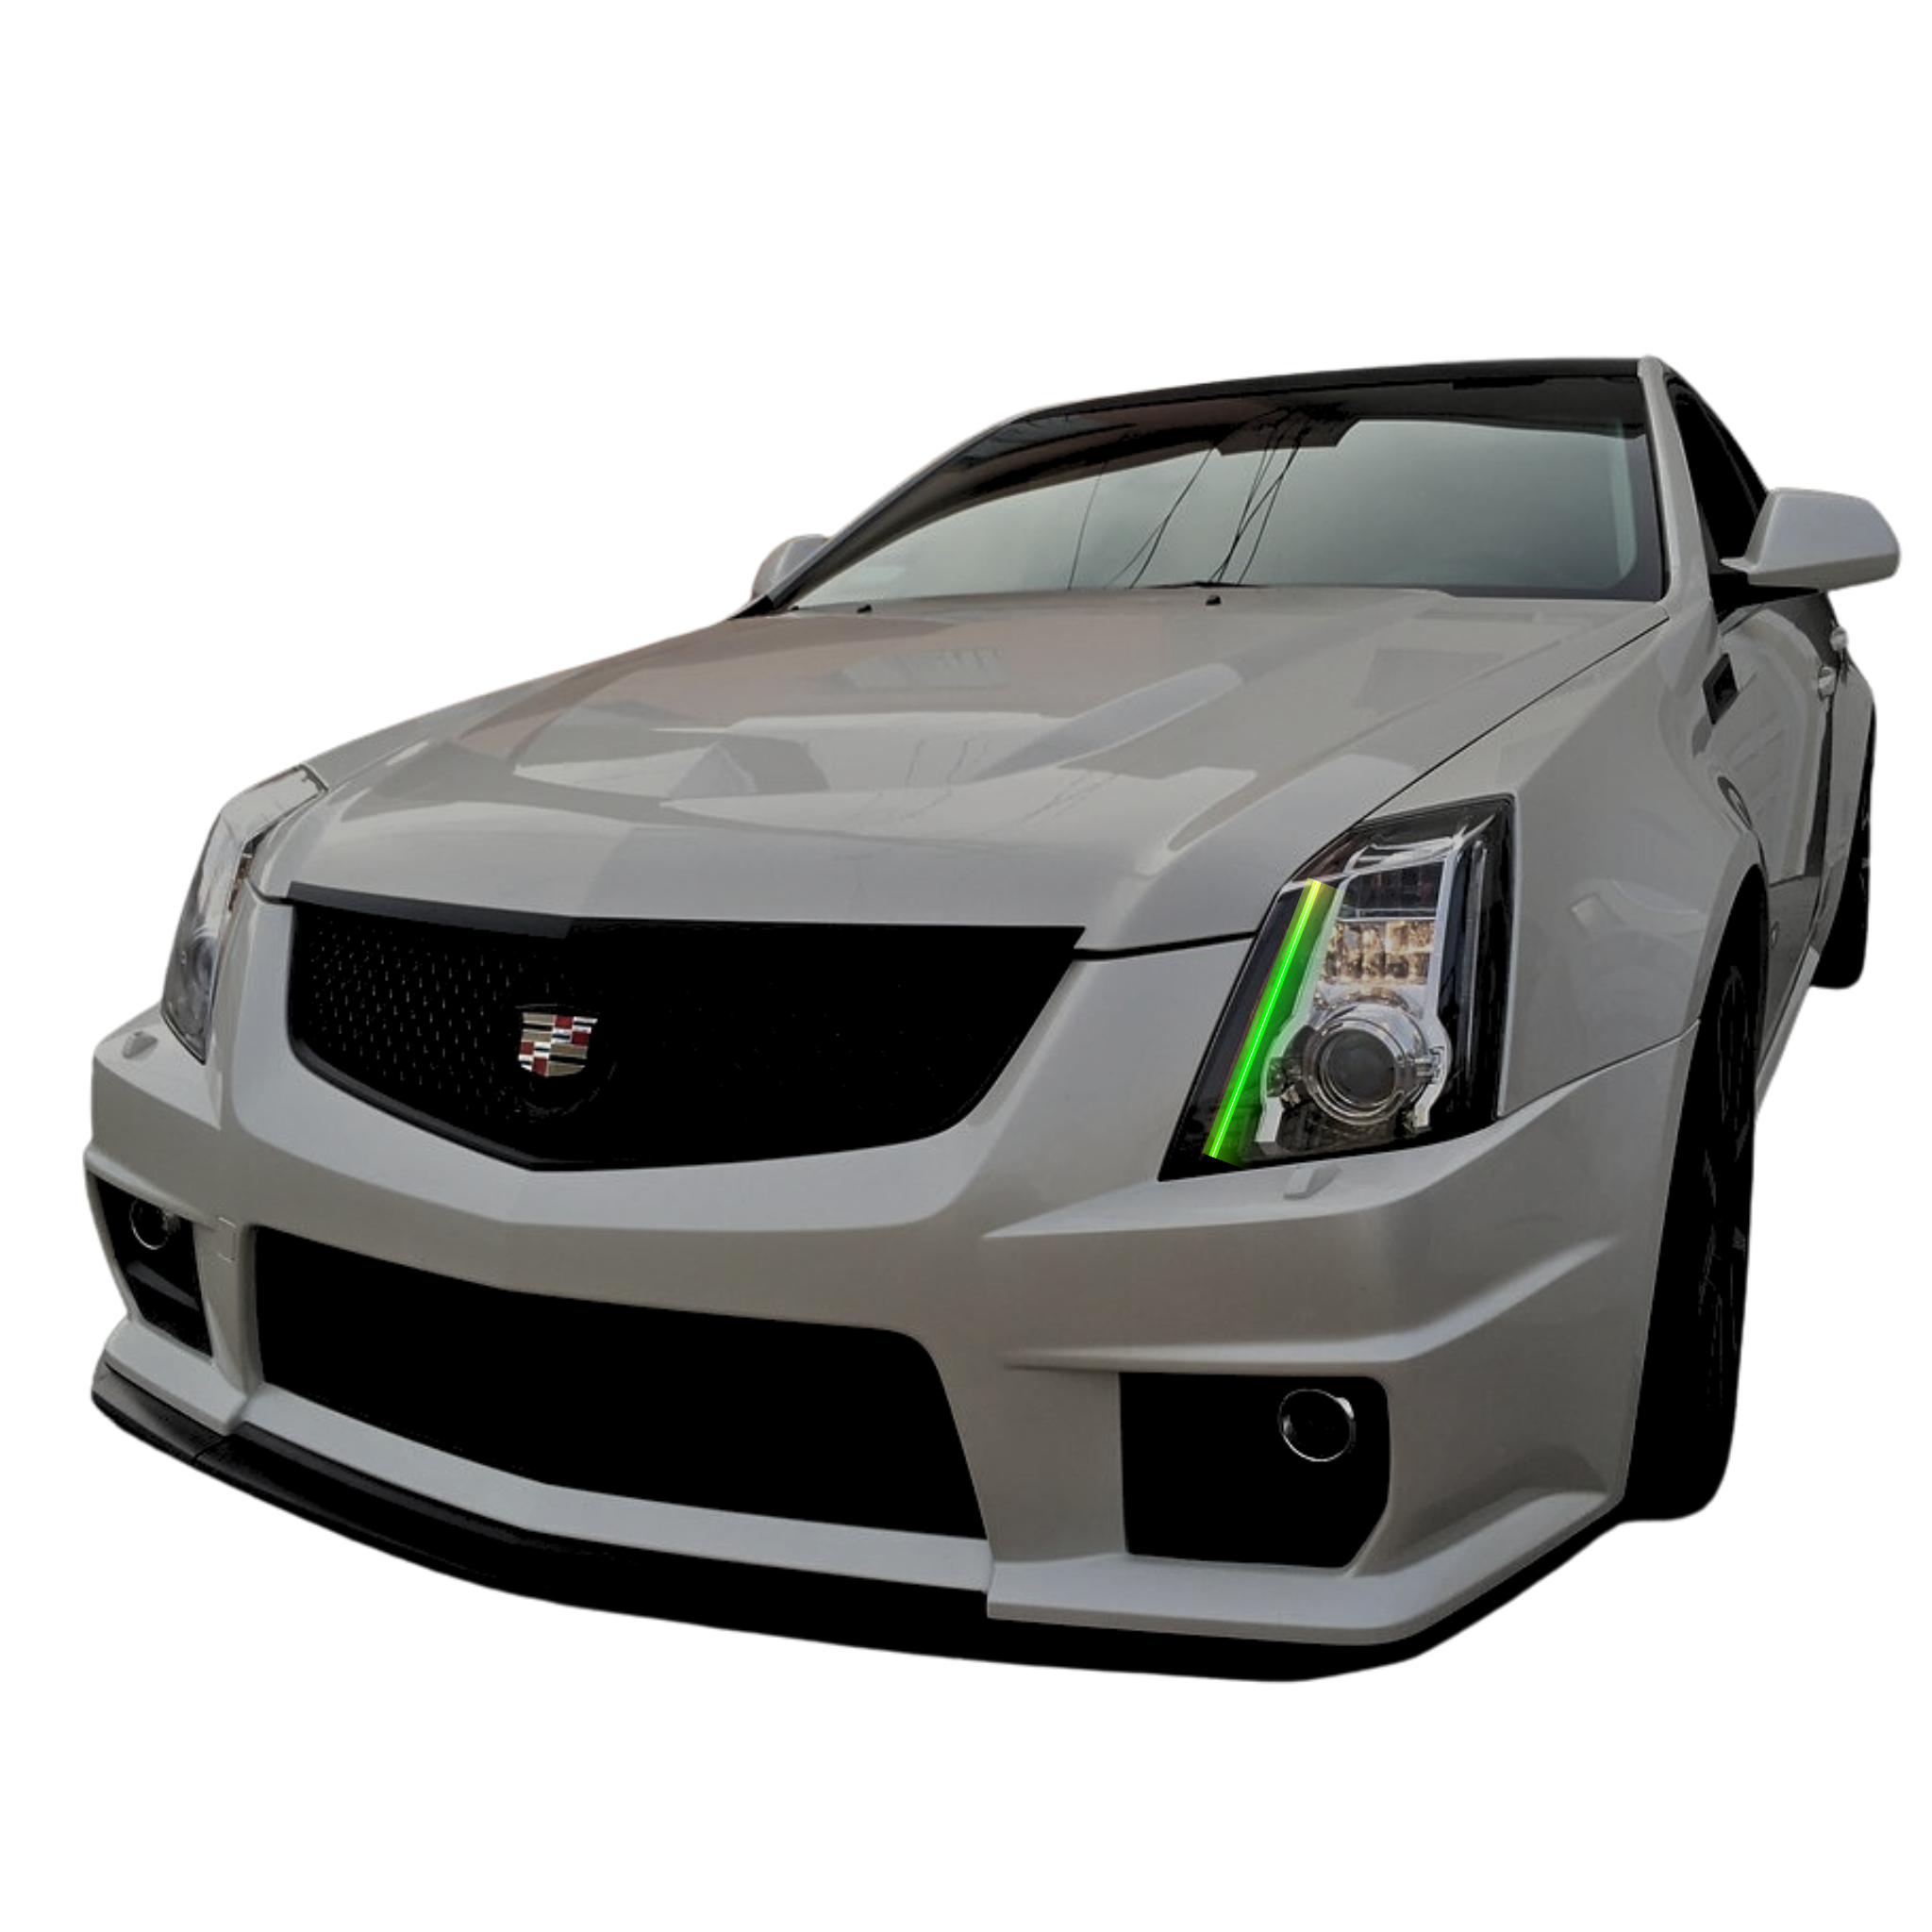 2008-2014 Cadillac CTSV RGBW DRL Boards - RGB Halo Kits Multicolor Flow Series Color Chasing RGBWA LED headlight kit Colorshift Oracle Lighting Trendz OneUpLighting Morimoto theretrofitsource AutoLEDTech Diode Dynamics